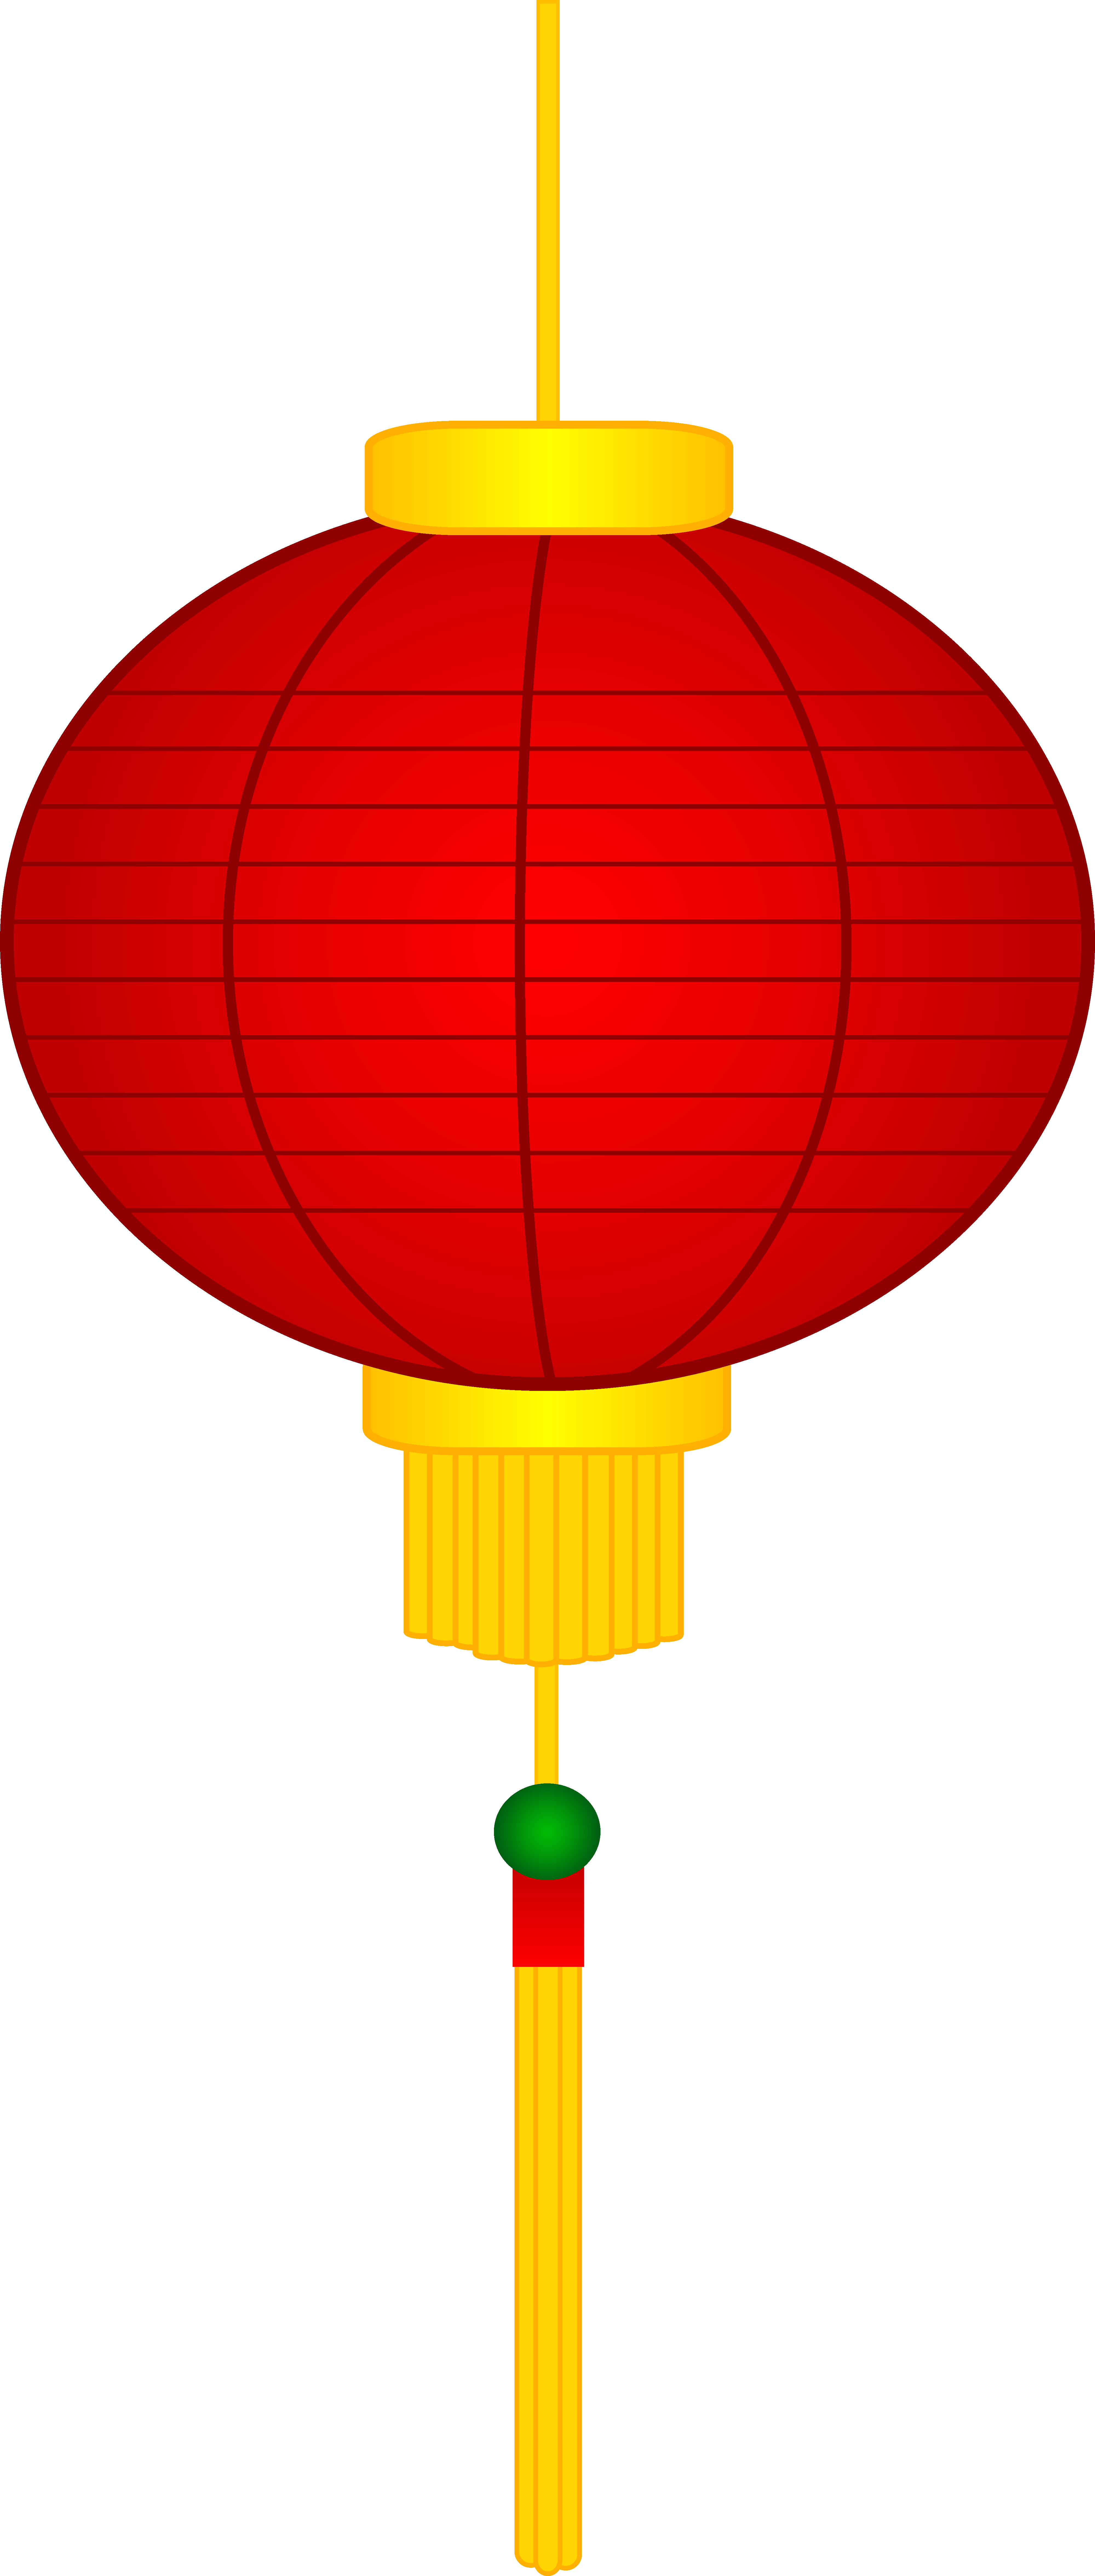 Red paper lantern free. Fan clipart theme chinese